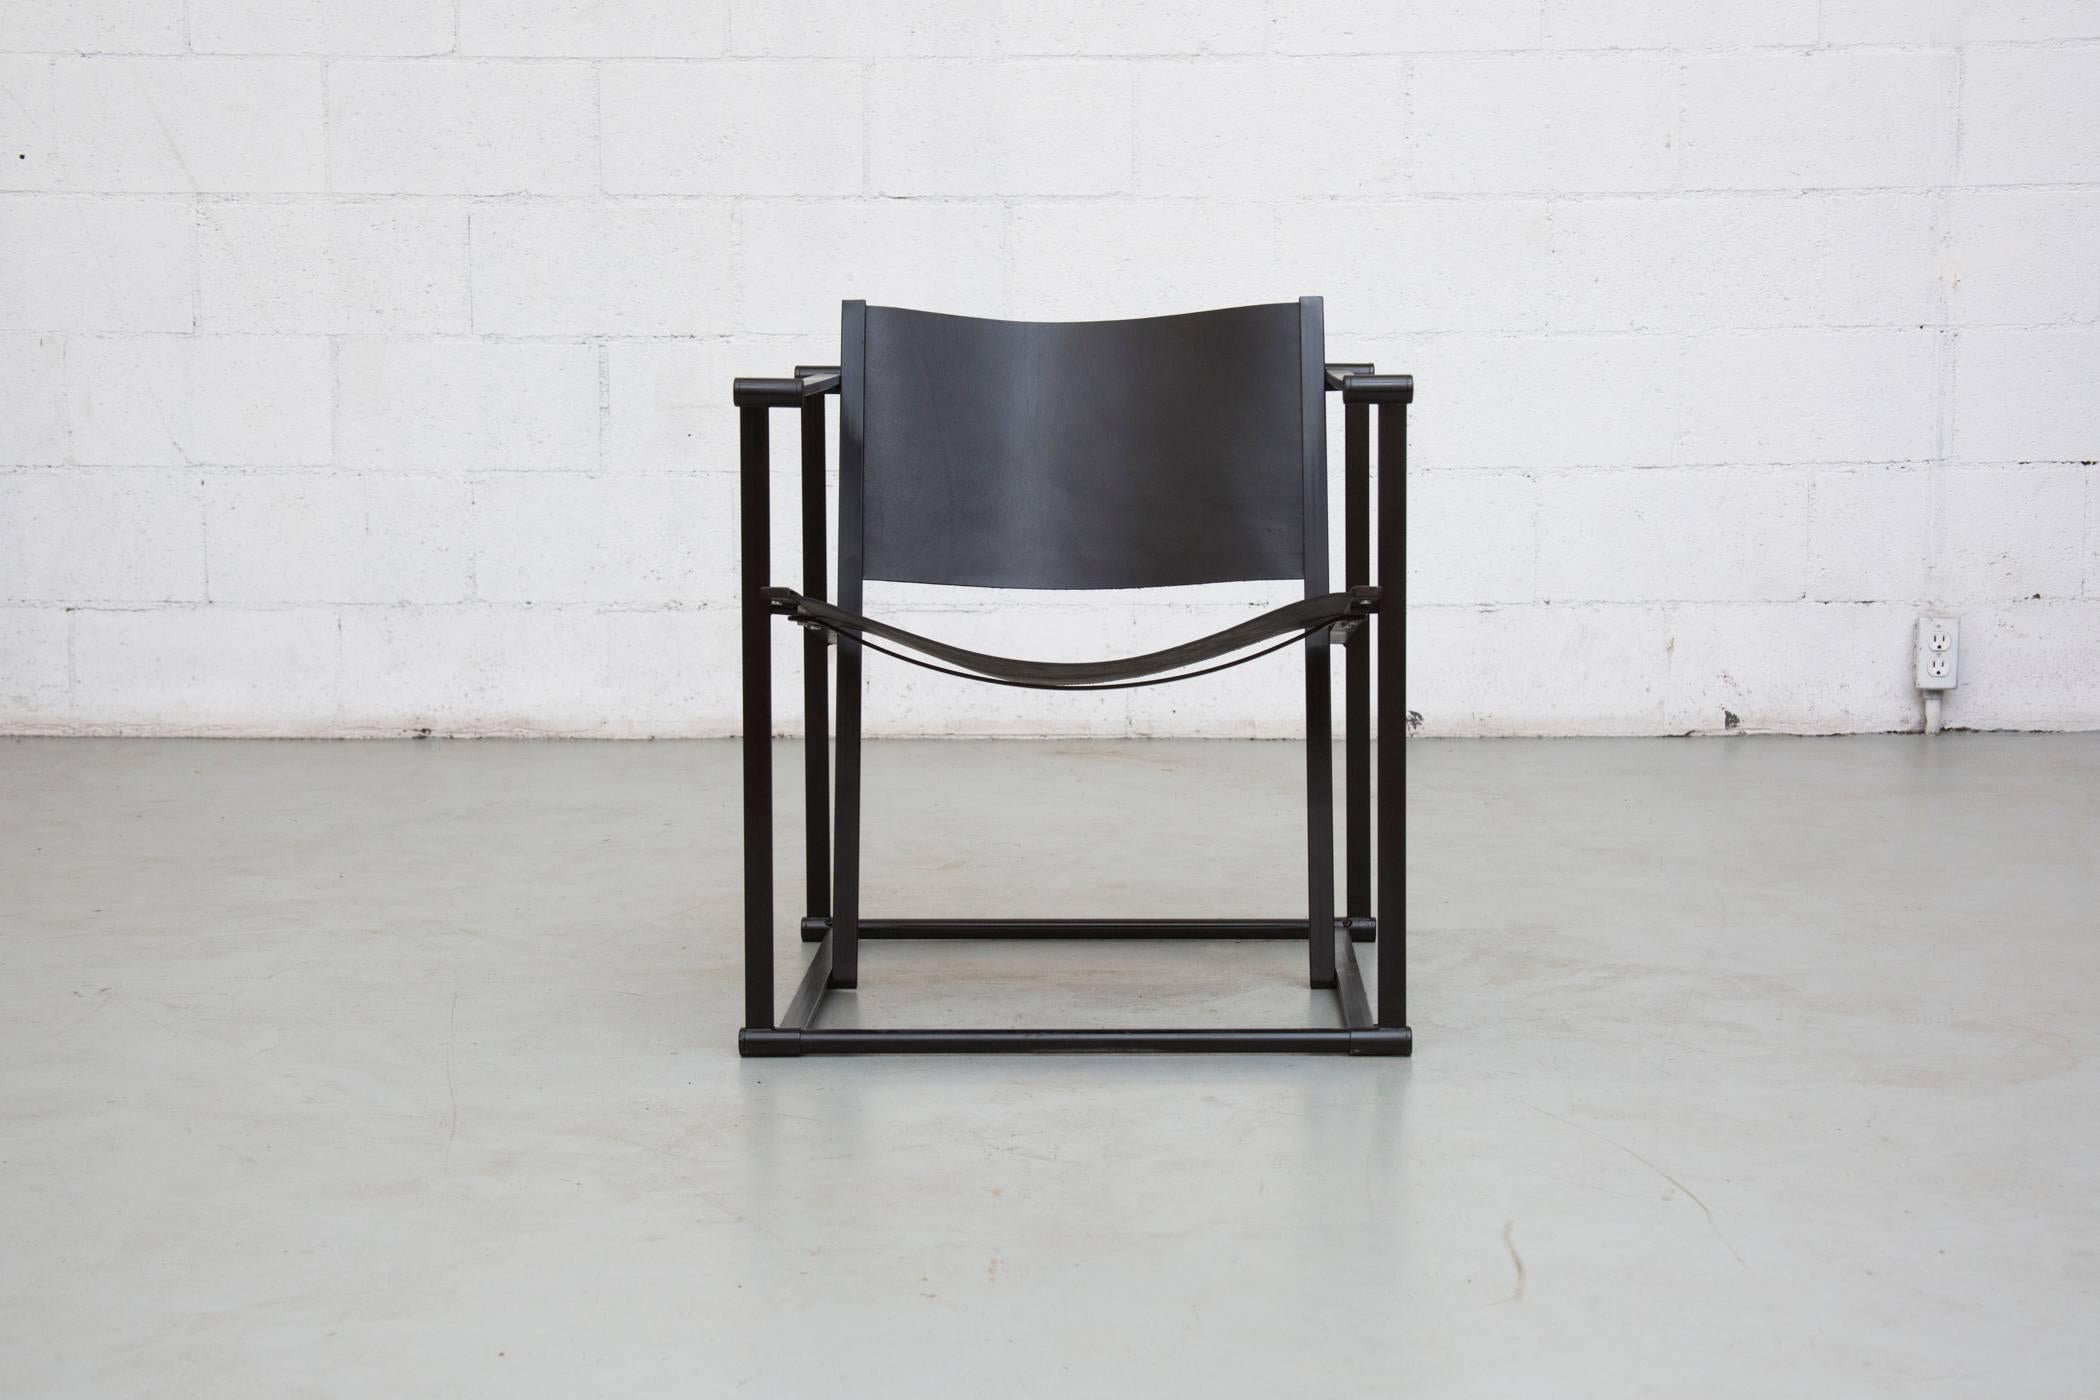 UMS Pastoe FM60, Cubic chair lounge chair, designed in 1980 by Radboud Van Beekum. Black enameled steel frame with new black leather seating. Frame is in original condition with some wear to enamel.